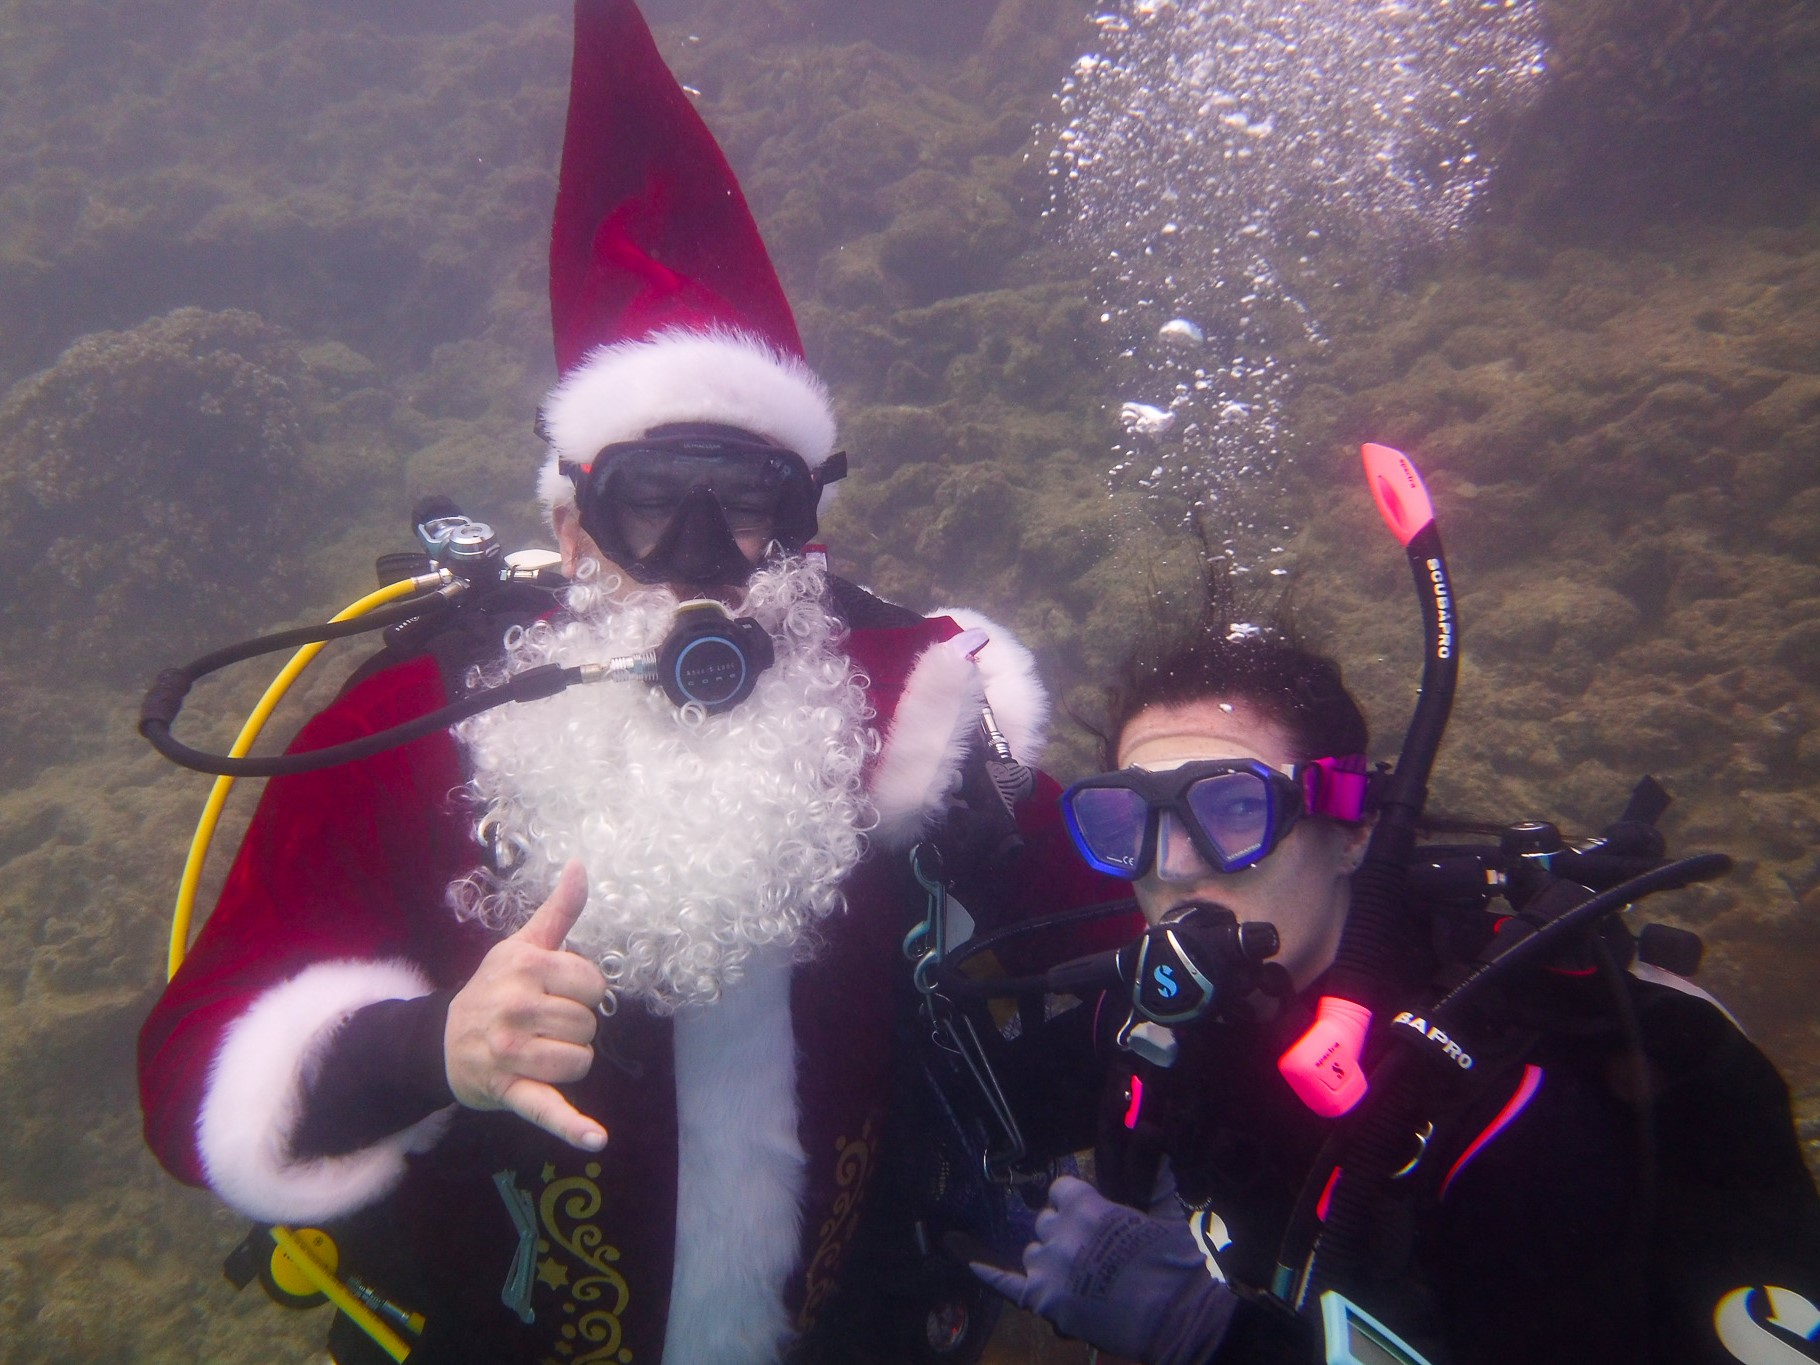 SCUBA Santa and volunteer diver posing underwater with shakas at the Nudi Wear cleanup dive